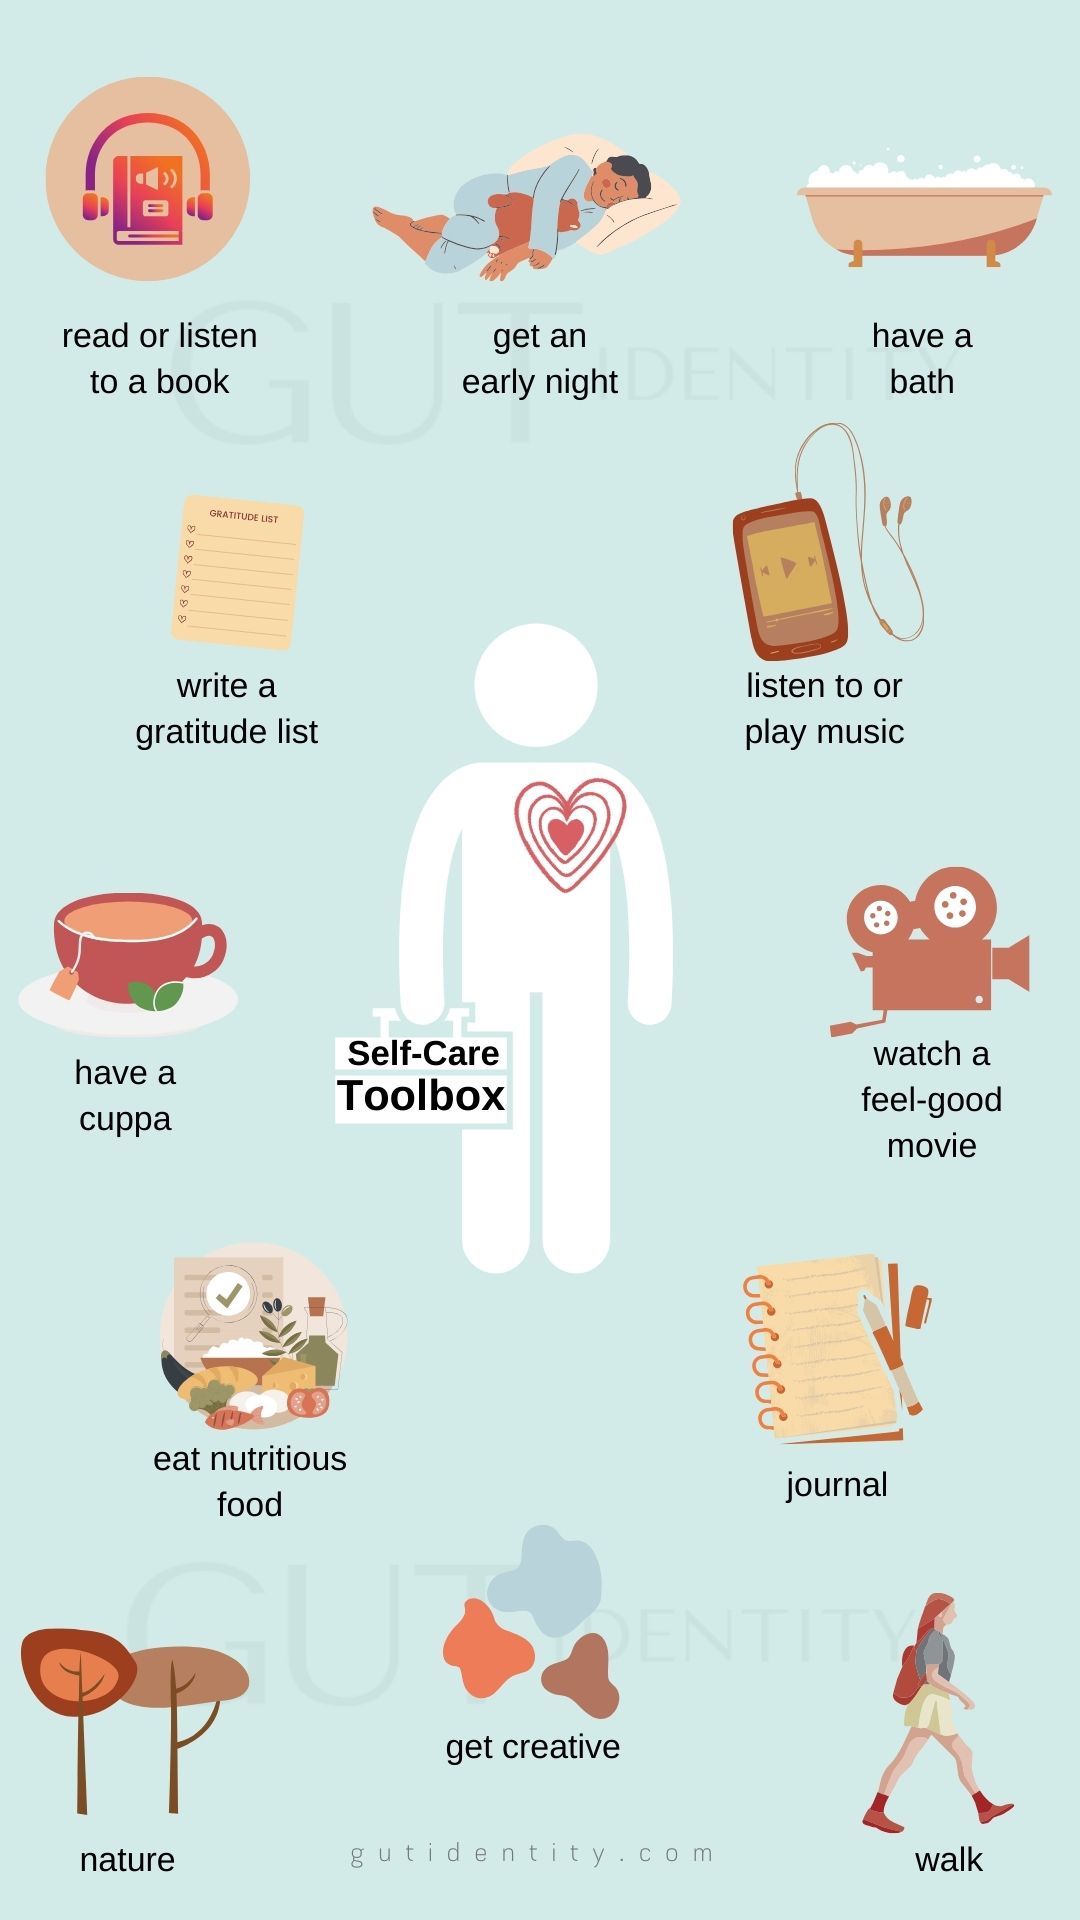 Self-Care Toolbox by Gutidentity